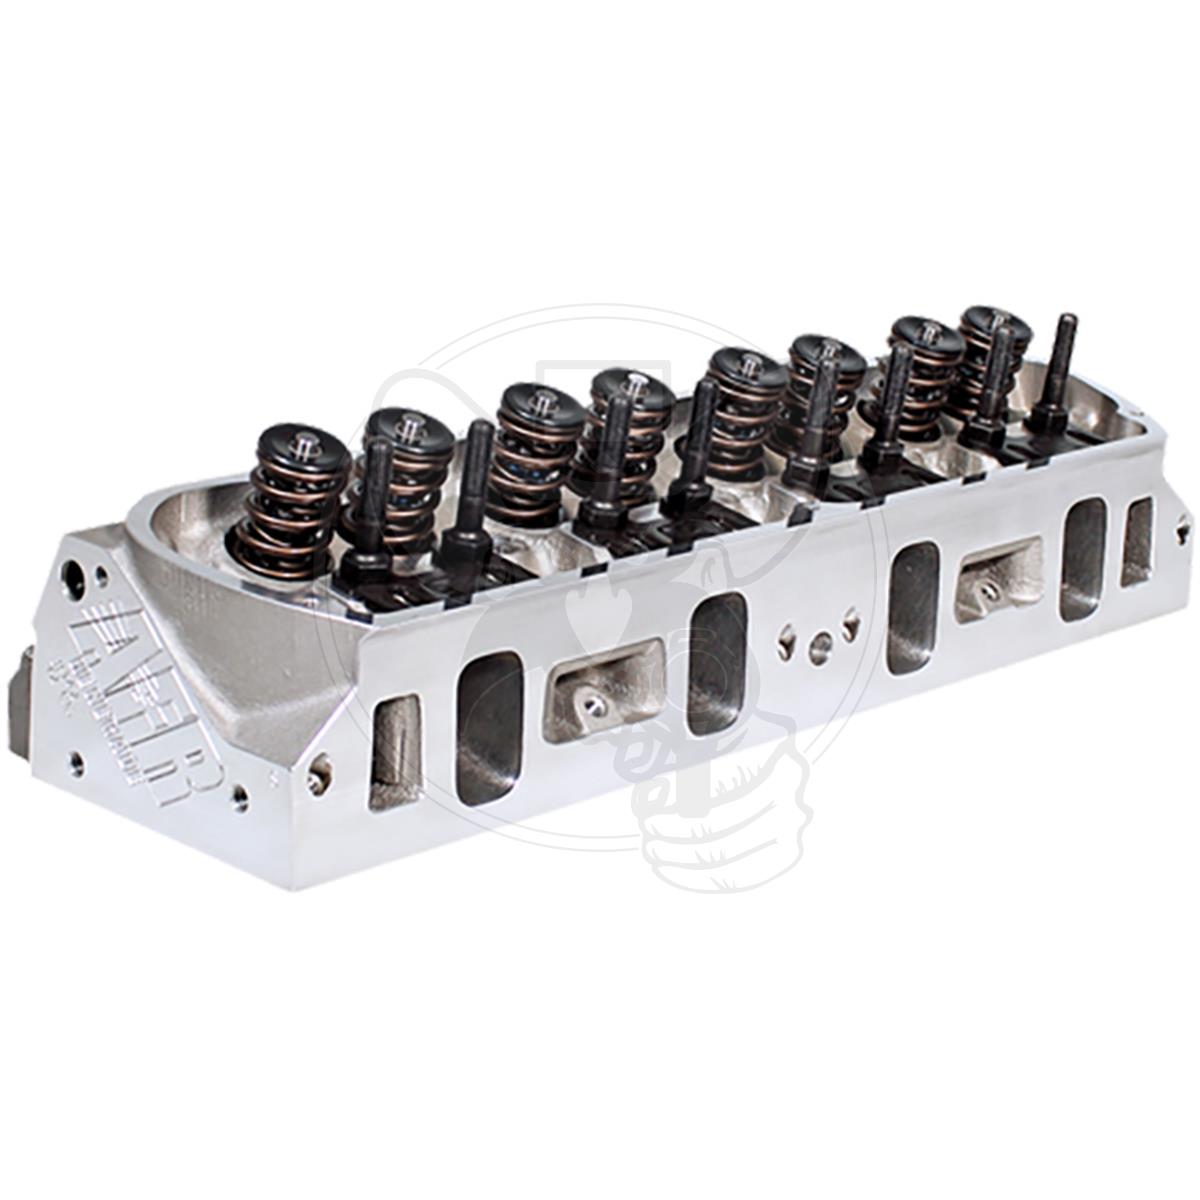 Afr1381 716 Afr Cylinder Heads Fits Small Block Ford 19558cc